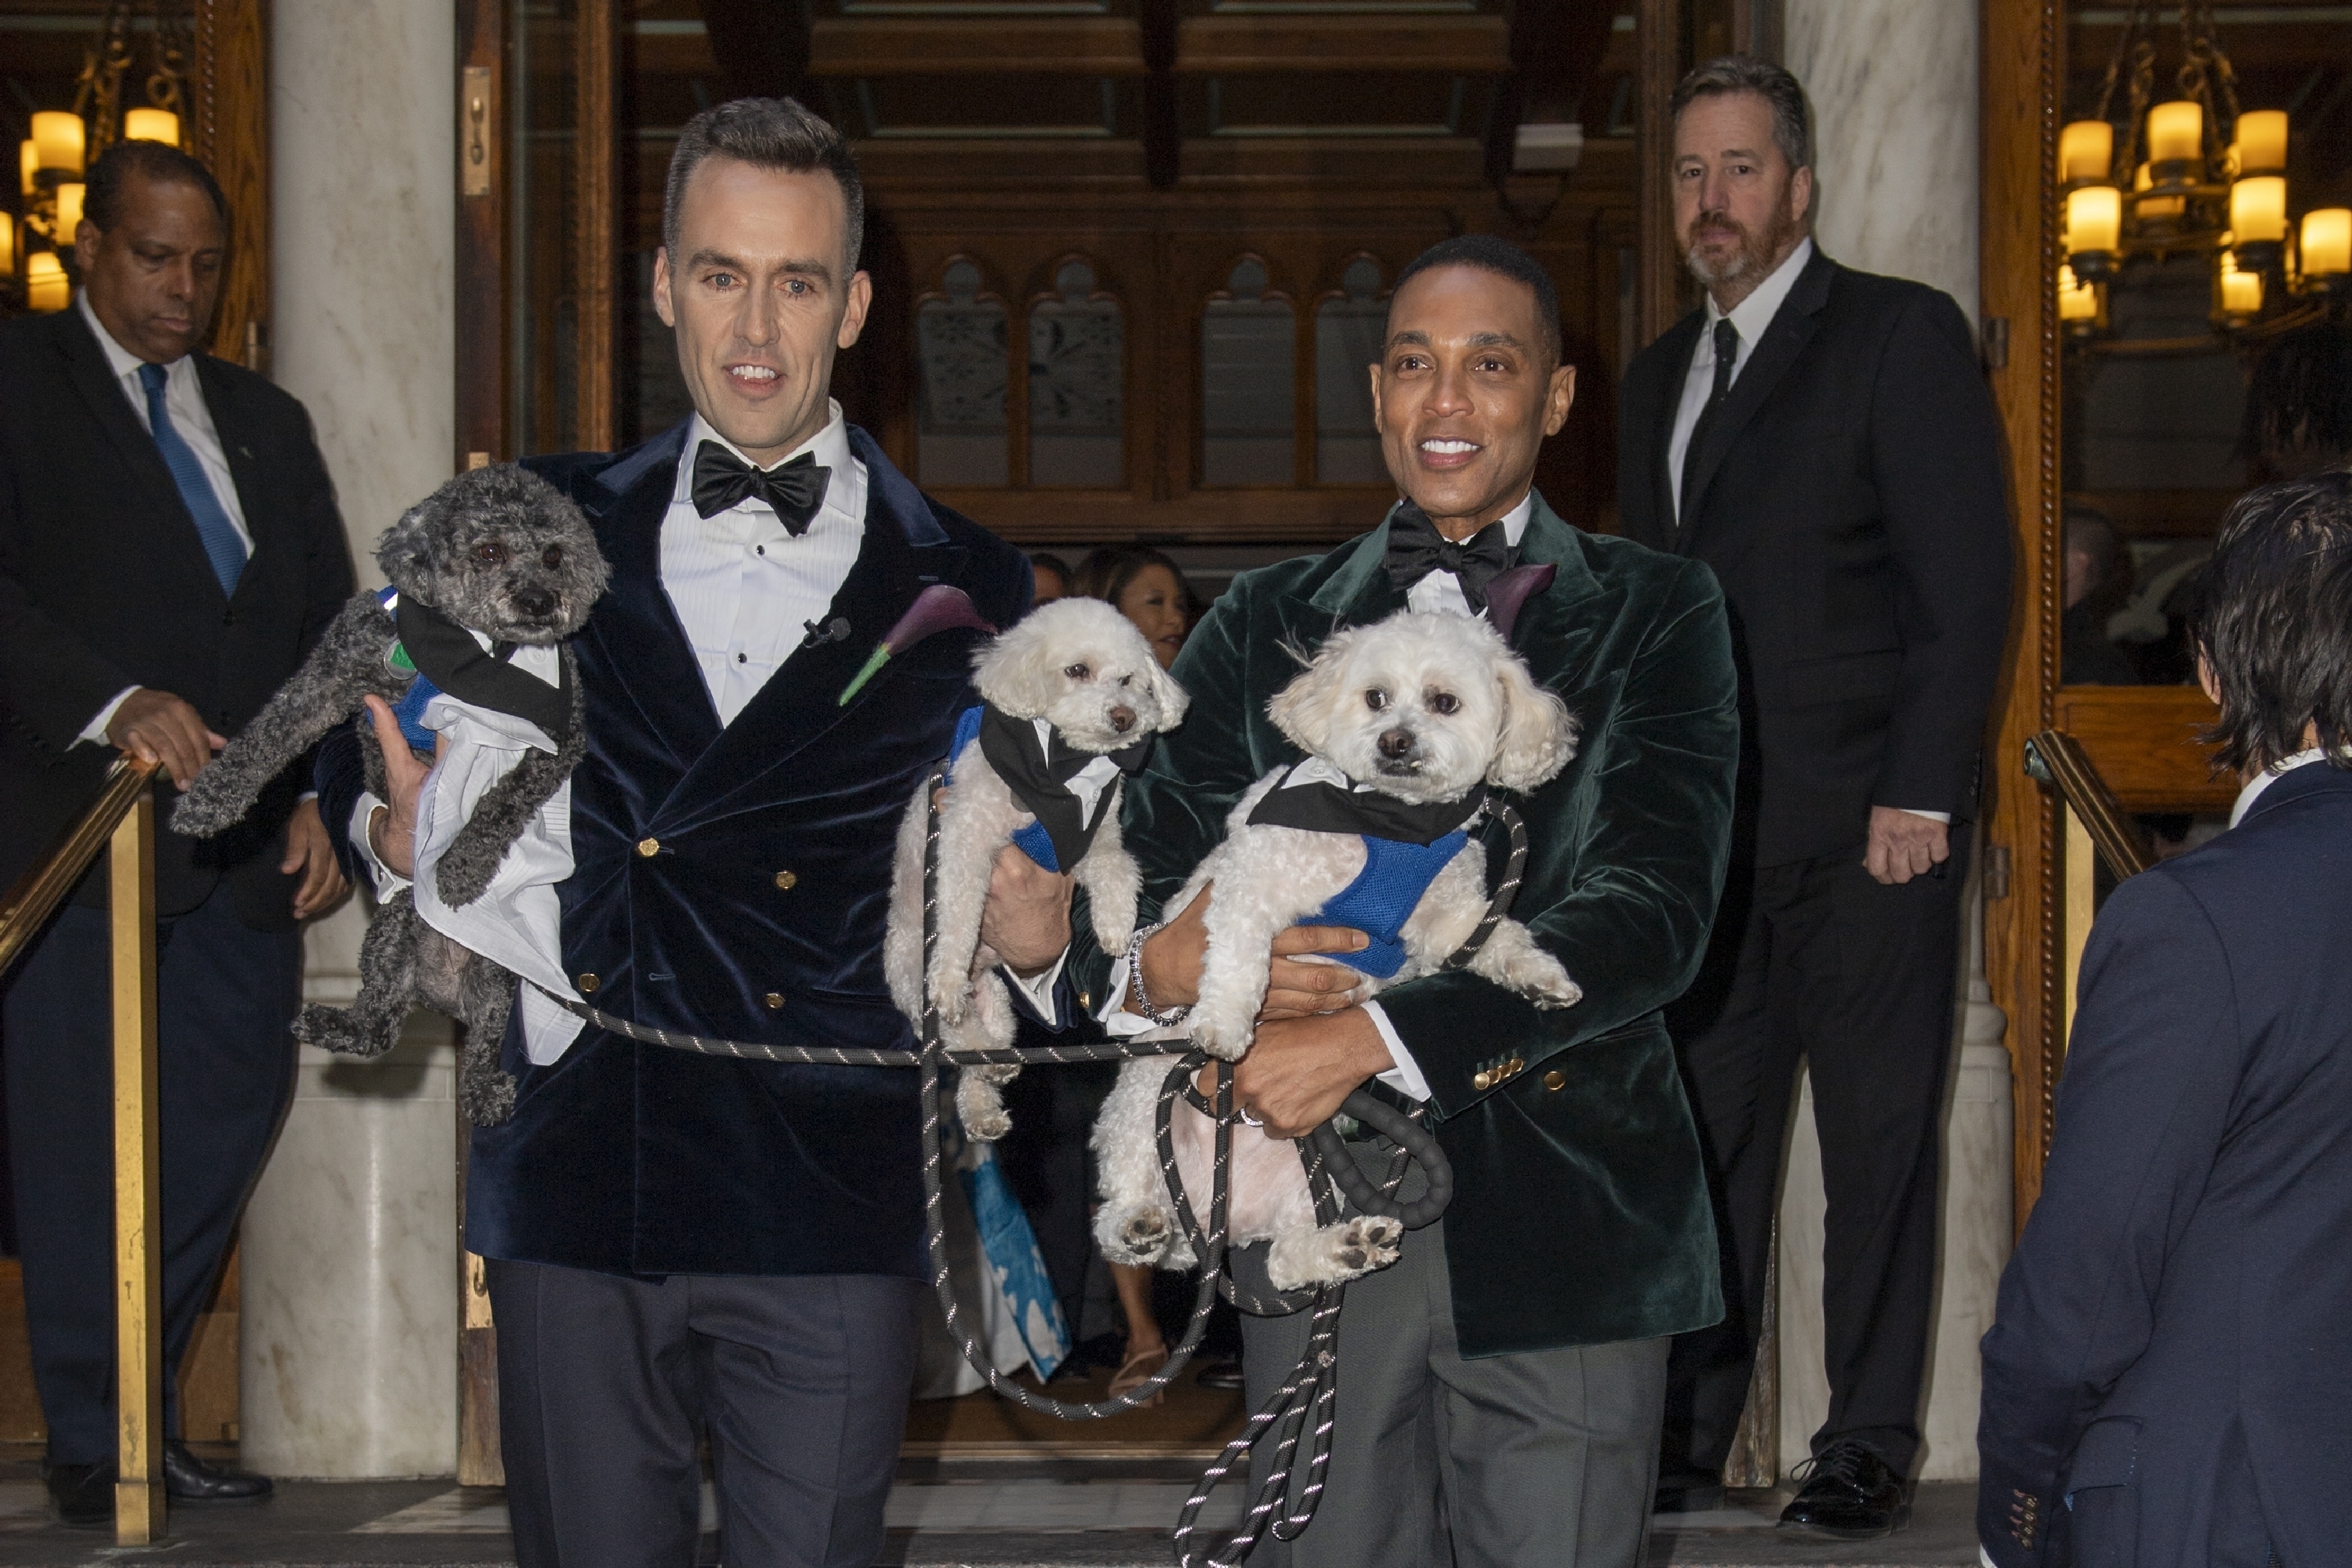 Tim Malone and Don Lemon holding their dogs